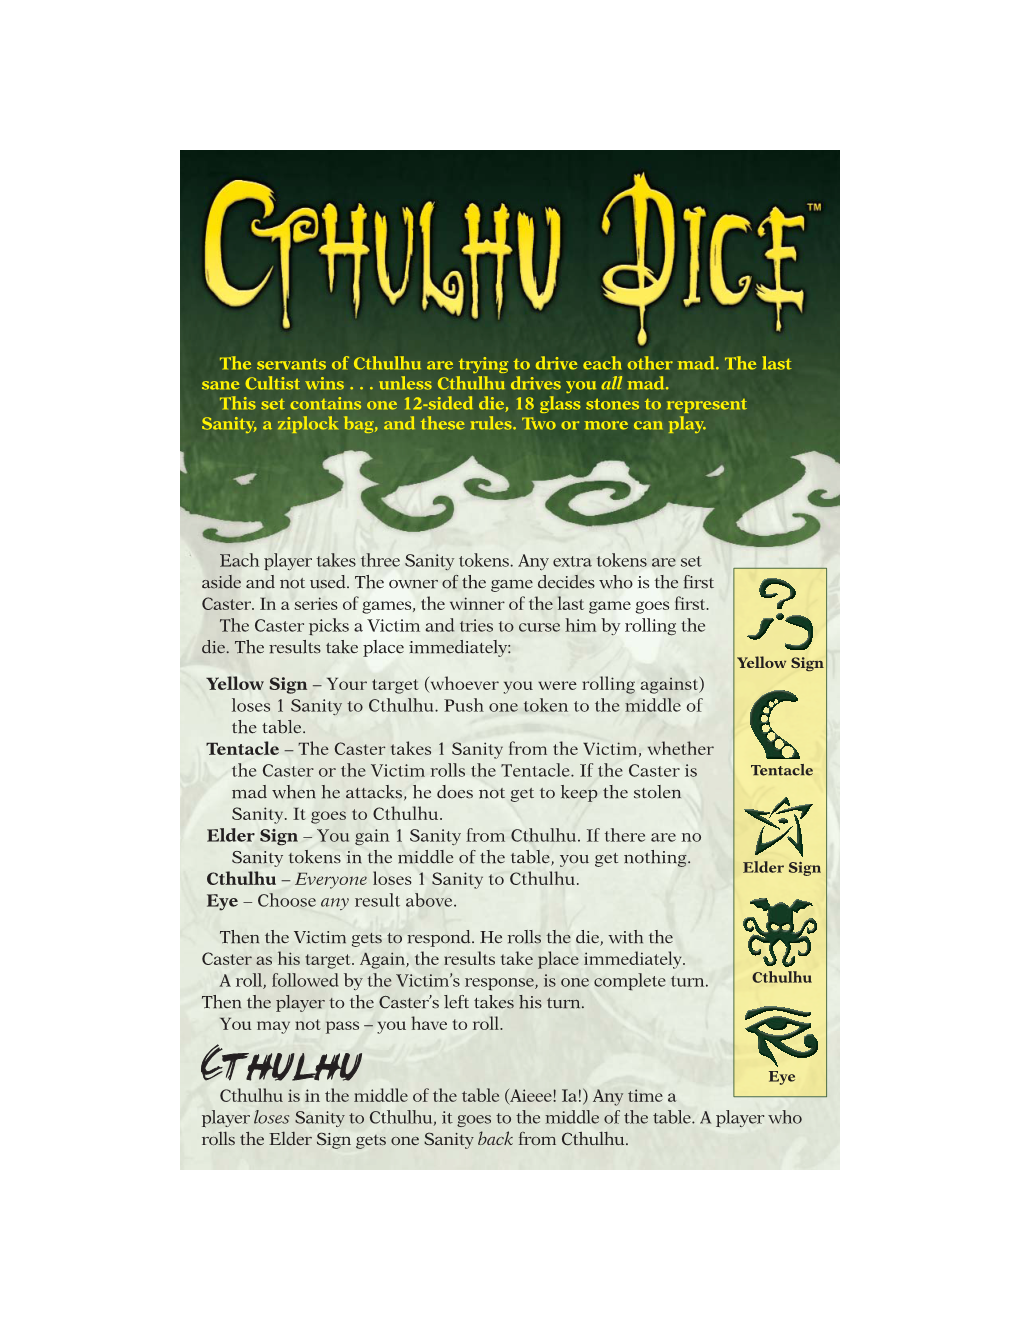 Cthulhu Dice Rules.Qxd:Layout 1